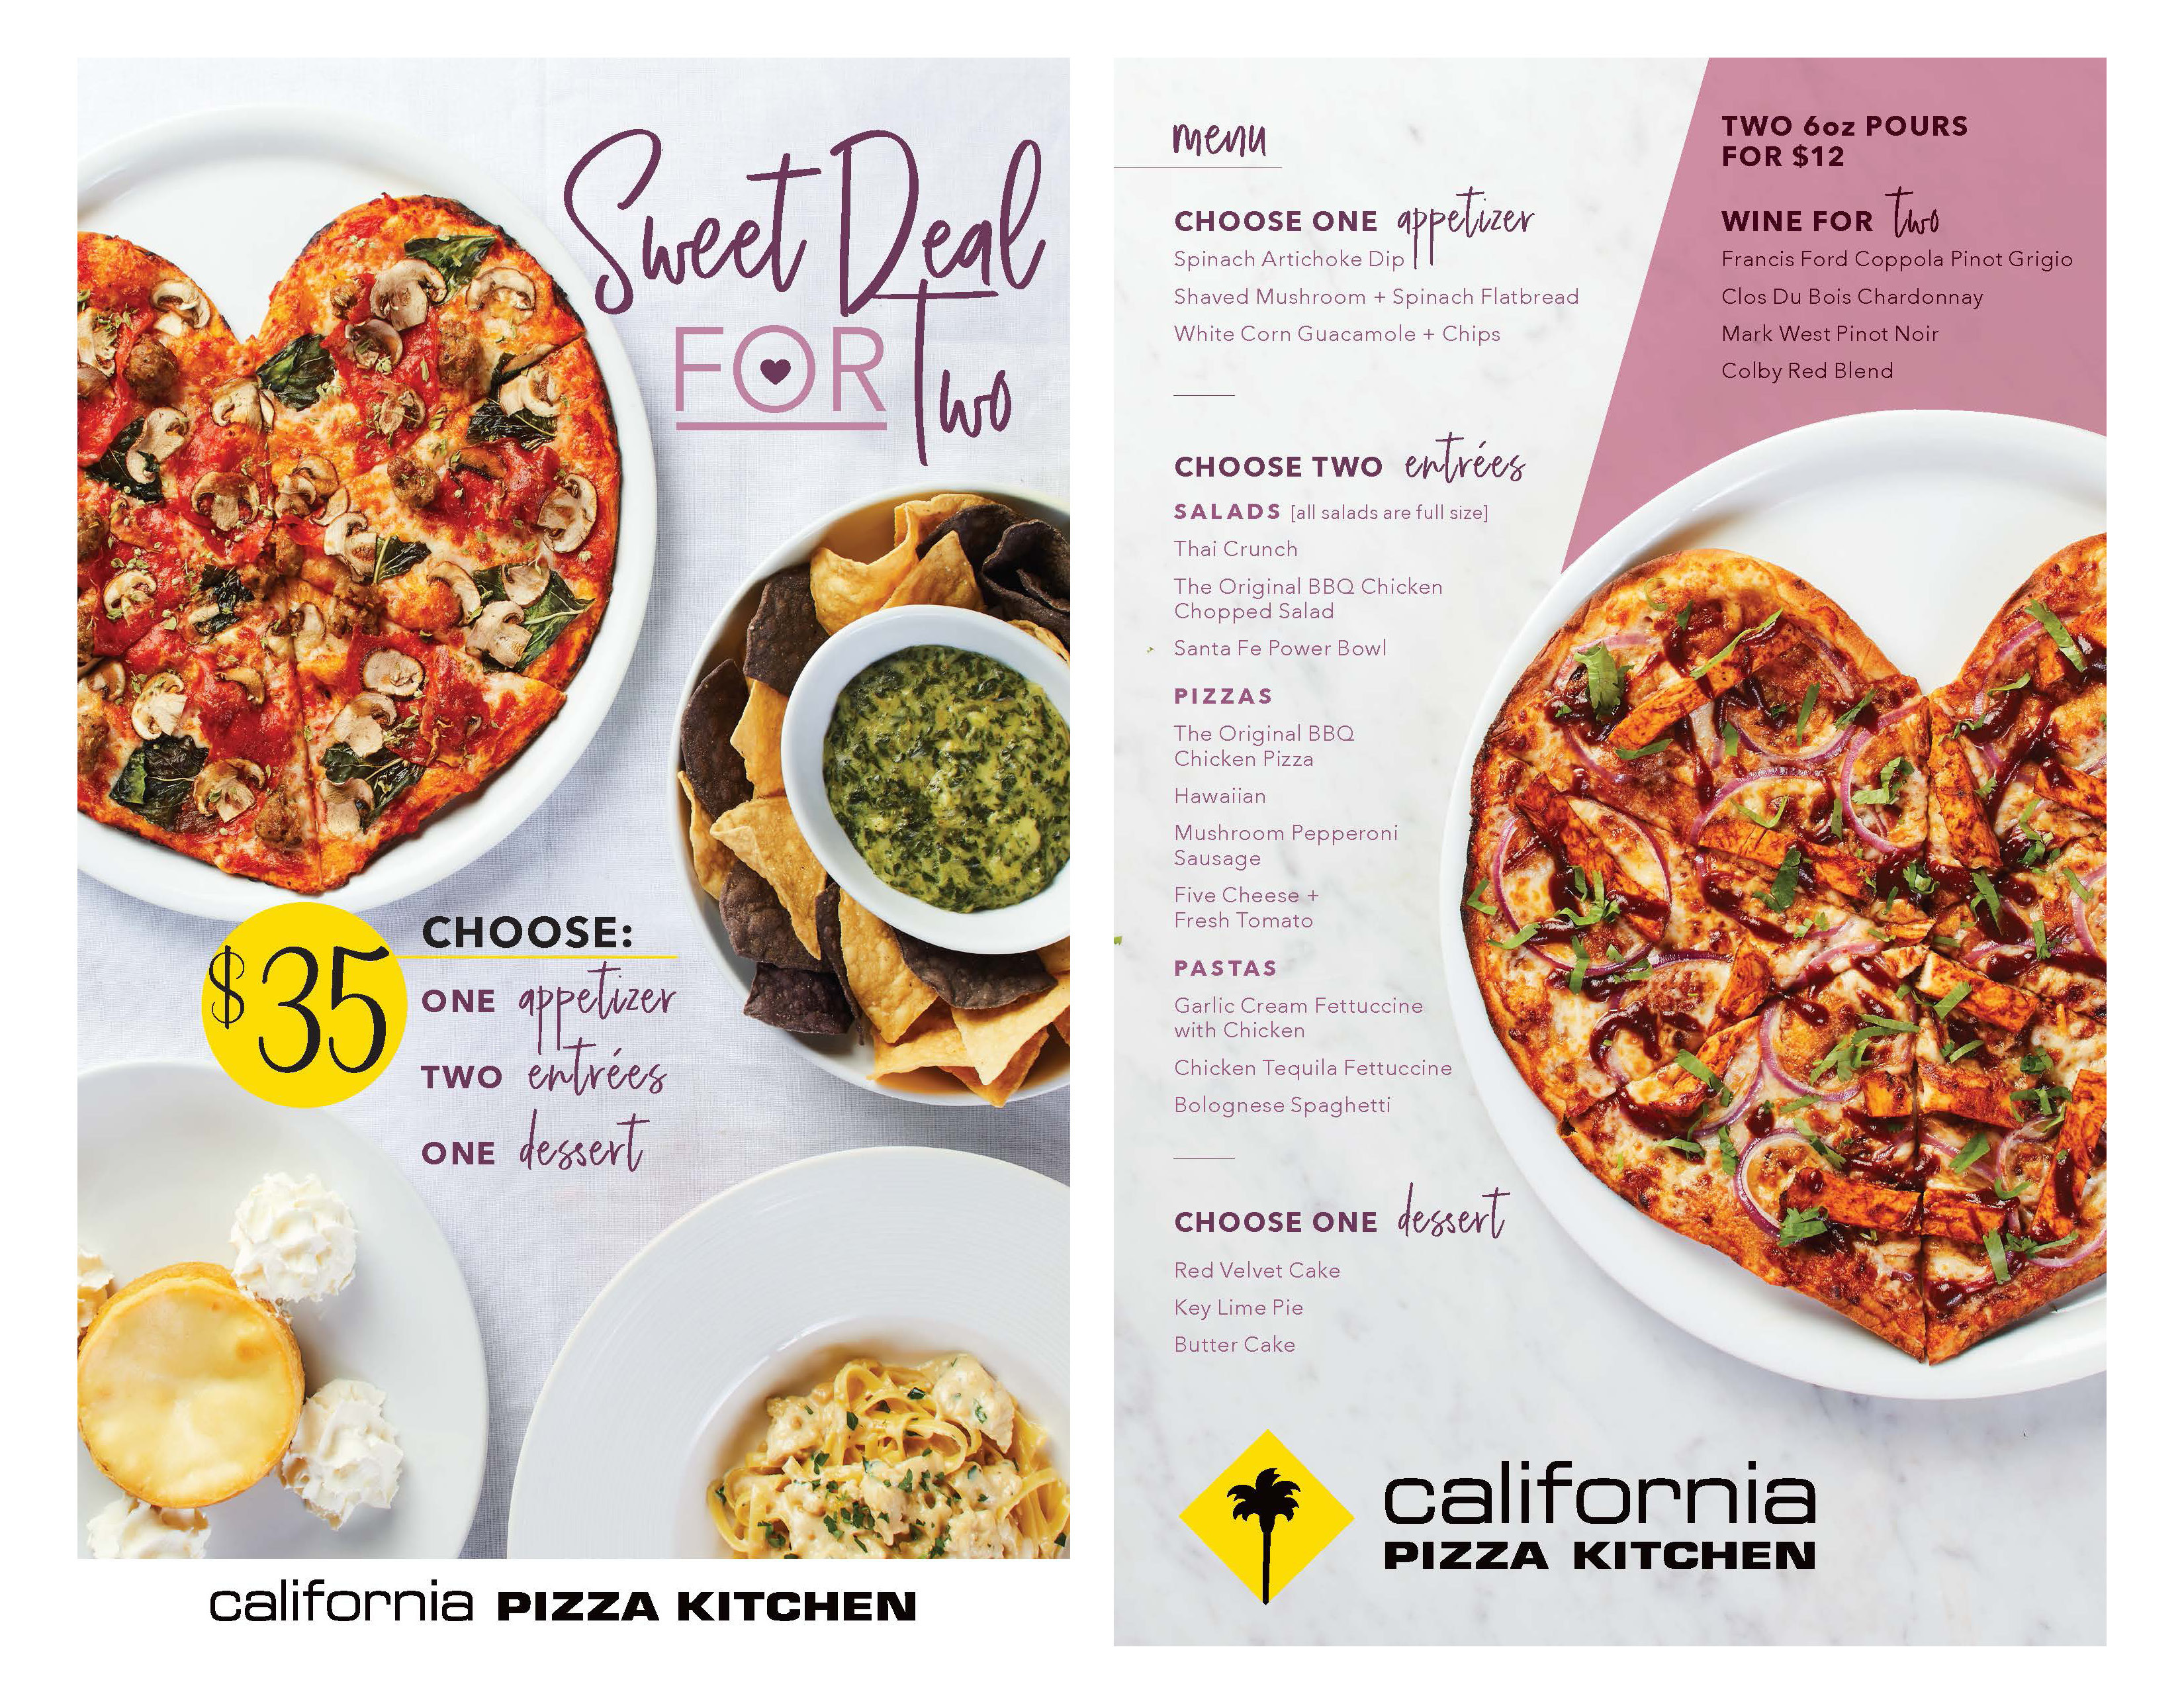 California Pizza Kitchen Dishes Out The Love This Valentines Day